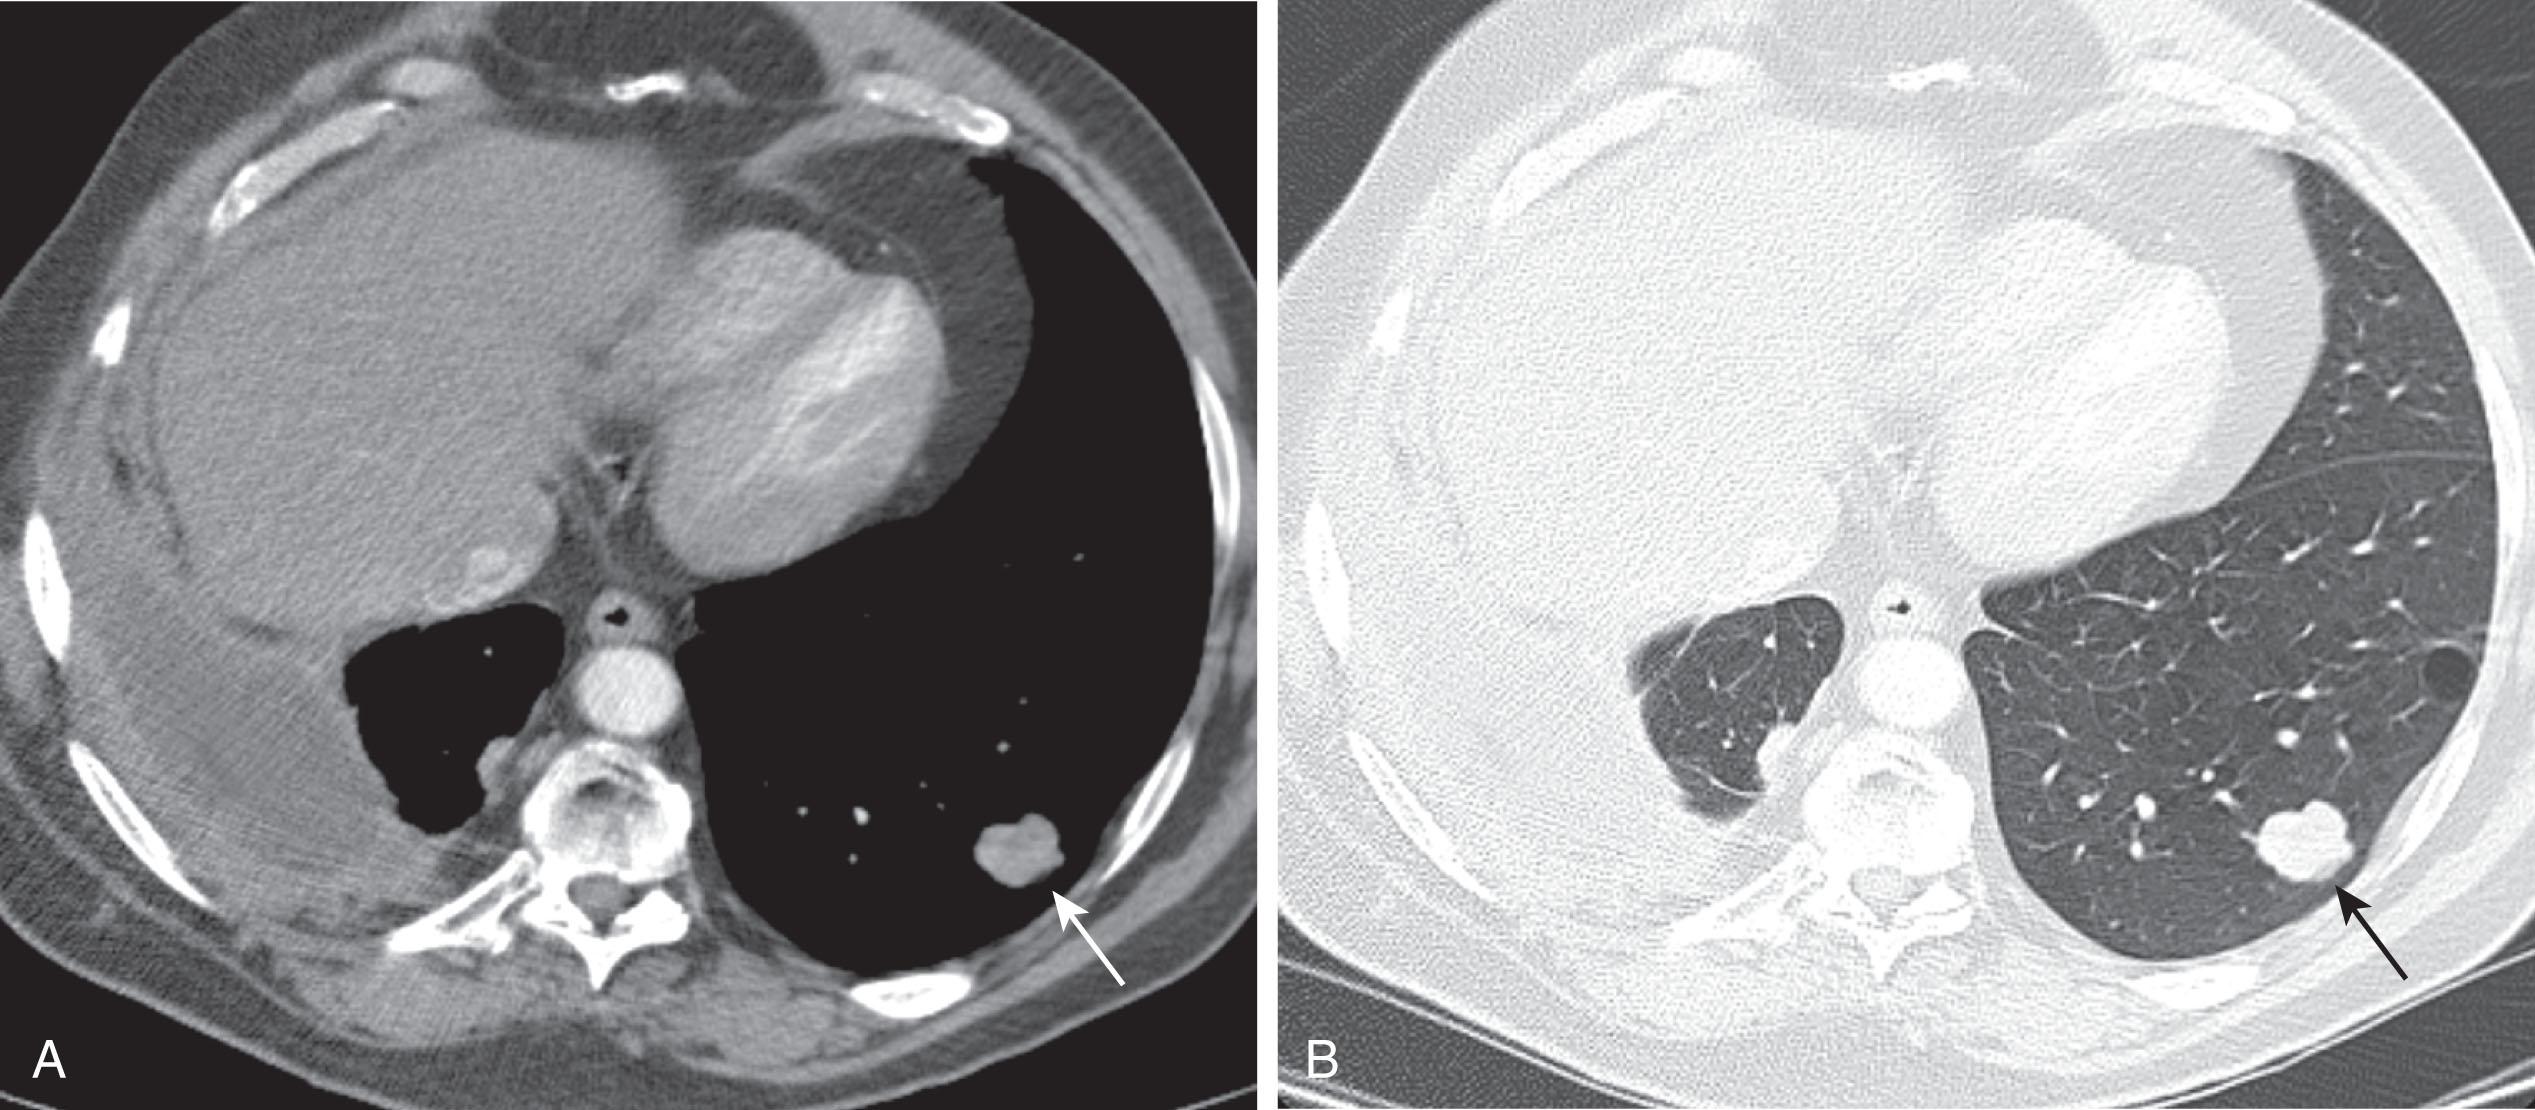 Figure 9.3, A 61-year-old man with right epithelioid malignant pleural mesothelioma. Contrast-enhanced computed tomography with mediastinal window ( A ) and lung window ( B ) shows nodular right pleural thickening, small right pleural effusion, and rounded atelectasis in the middle and right lower lobes. Note the well-circumscribed left lower lobe 1.5-cm nodule ( arrows ) consistent with metastasis. The presence of metastatic disease precluded surgery, and the patient was treated with cisplatin and pemetrexed.